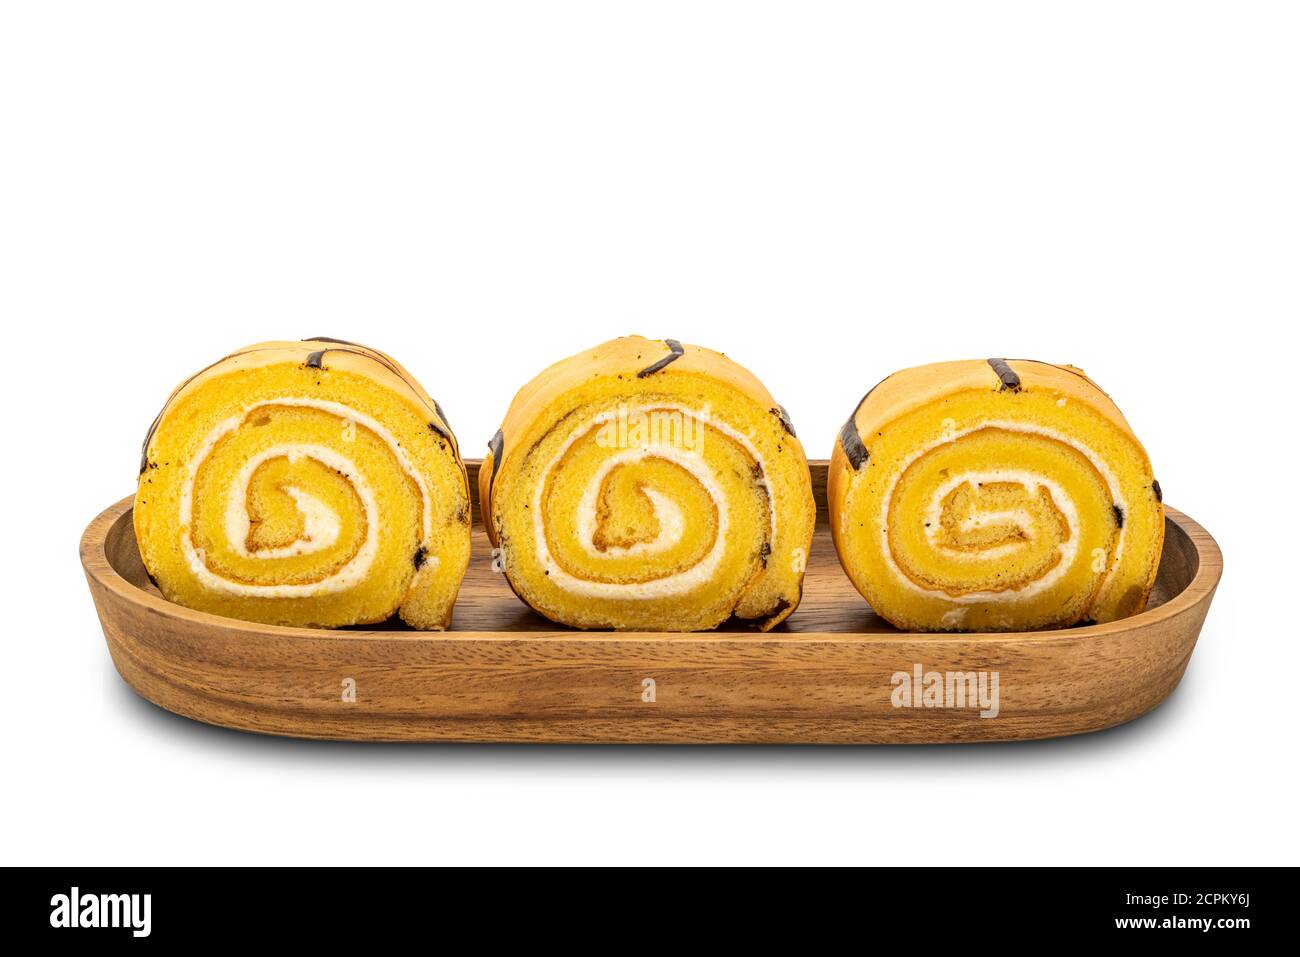 Row of sliced cake roll in a wooden tray on white background with clipping path. Stock Photo